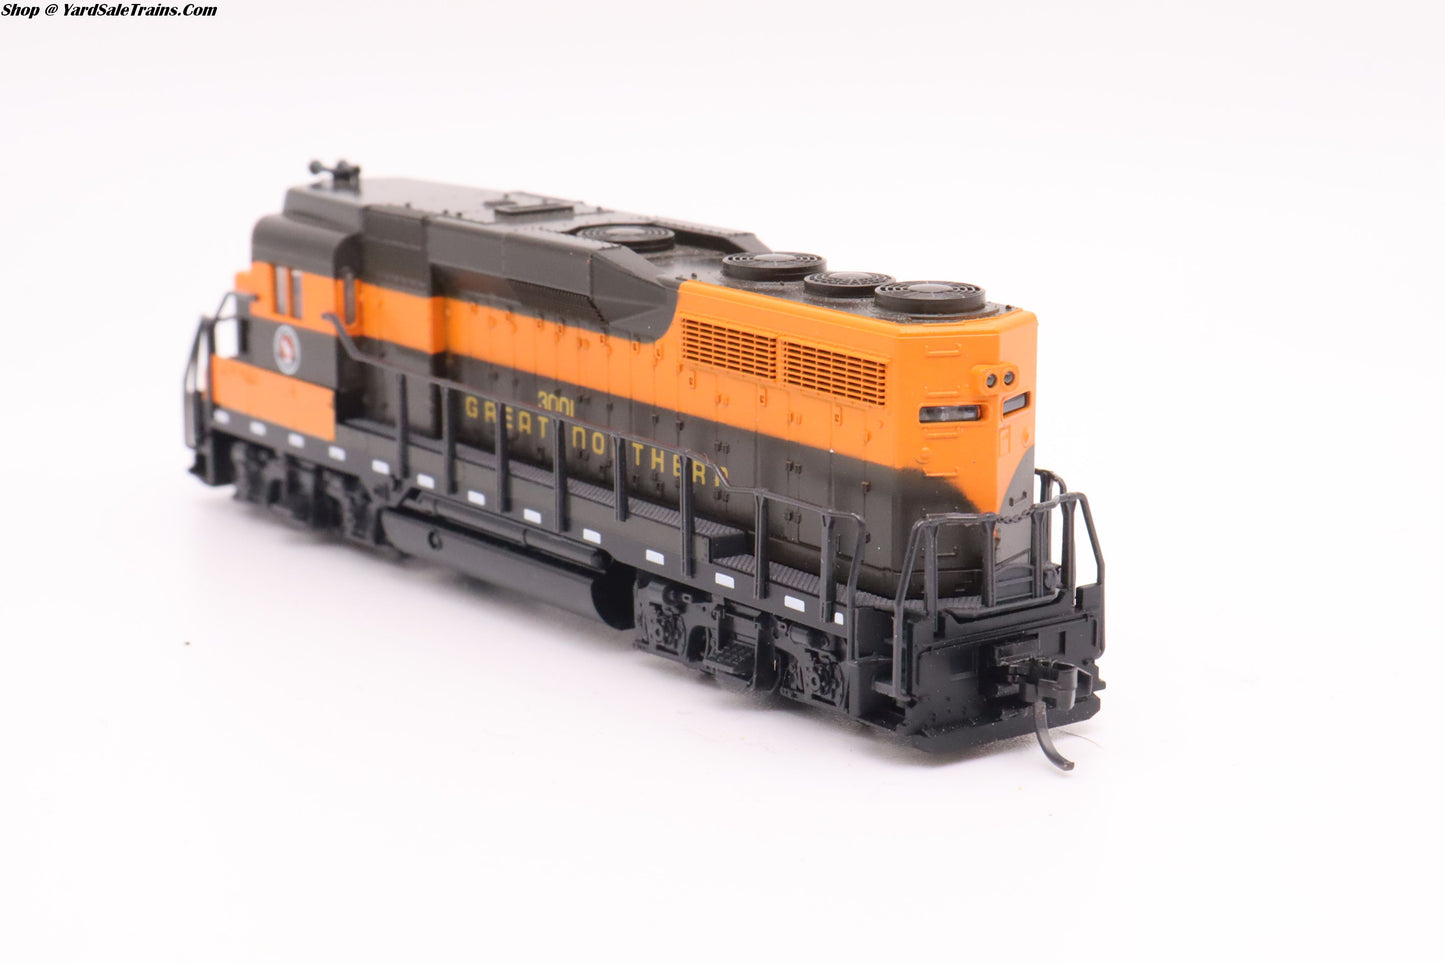 ATL-4730 - GP30 Great Northern - GN #3001 - Preowned